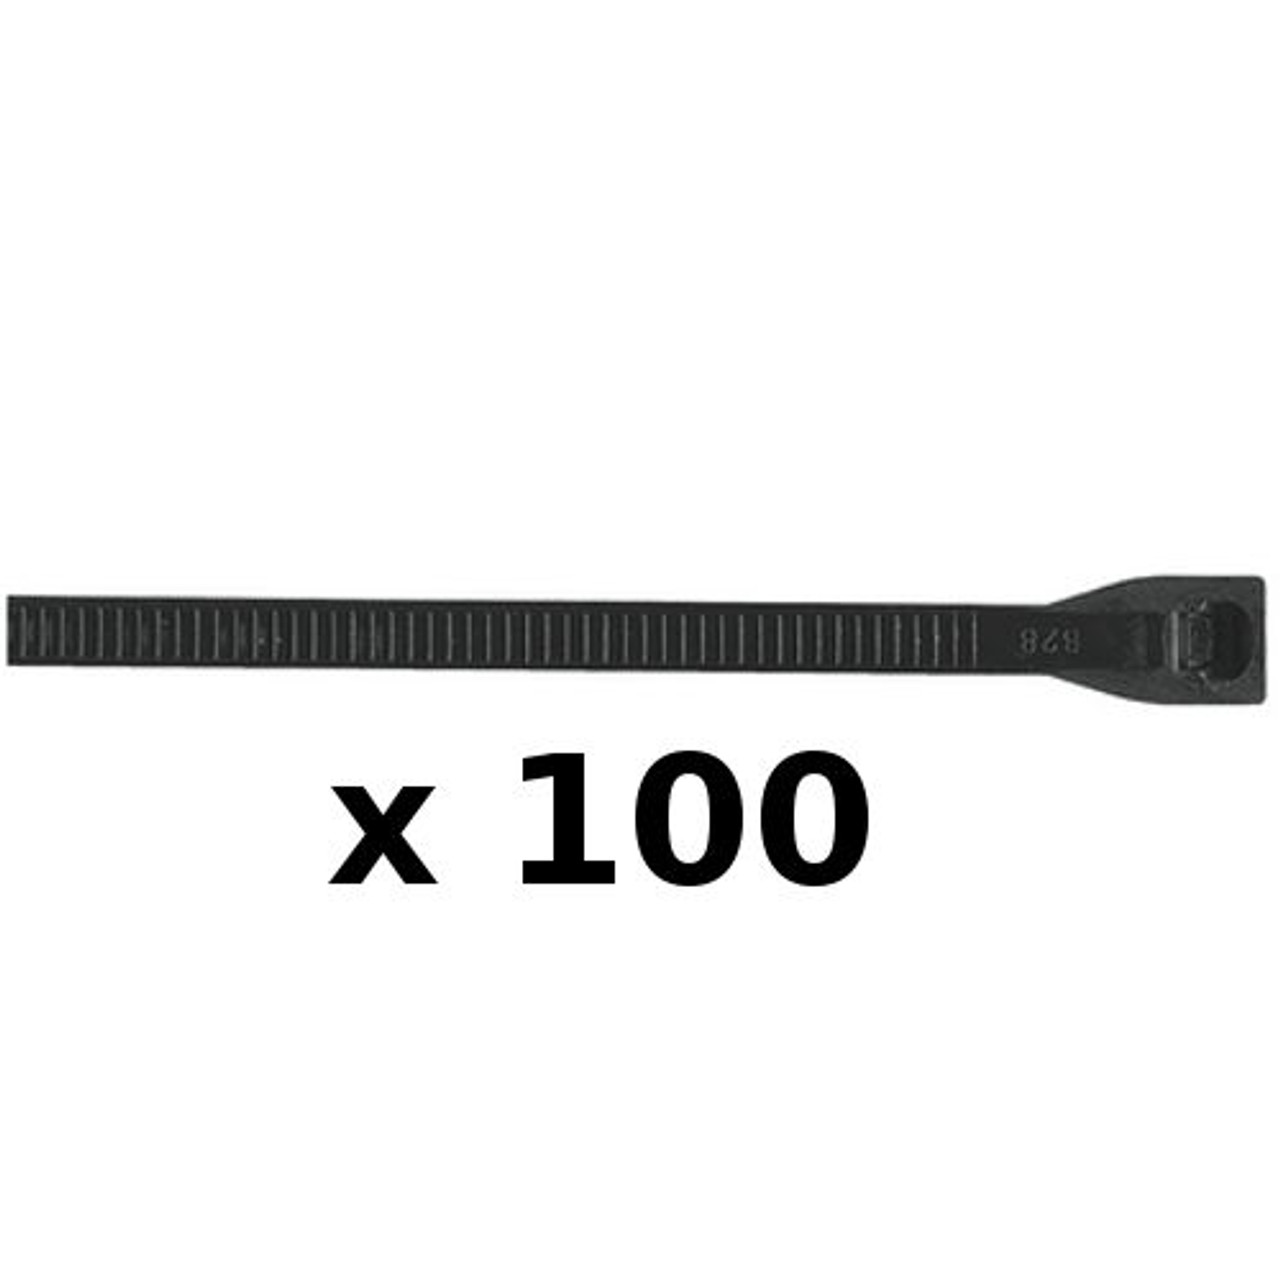 100 Pack of 11 Inch Black UV Resistant Cable Ties for Boats